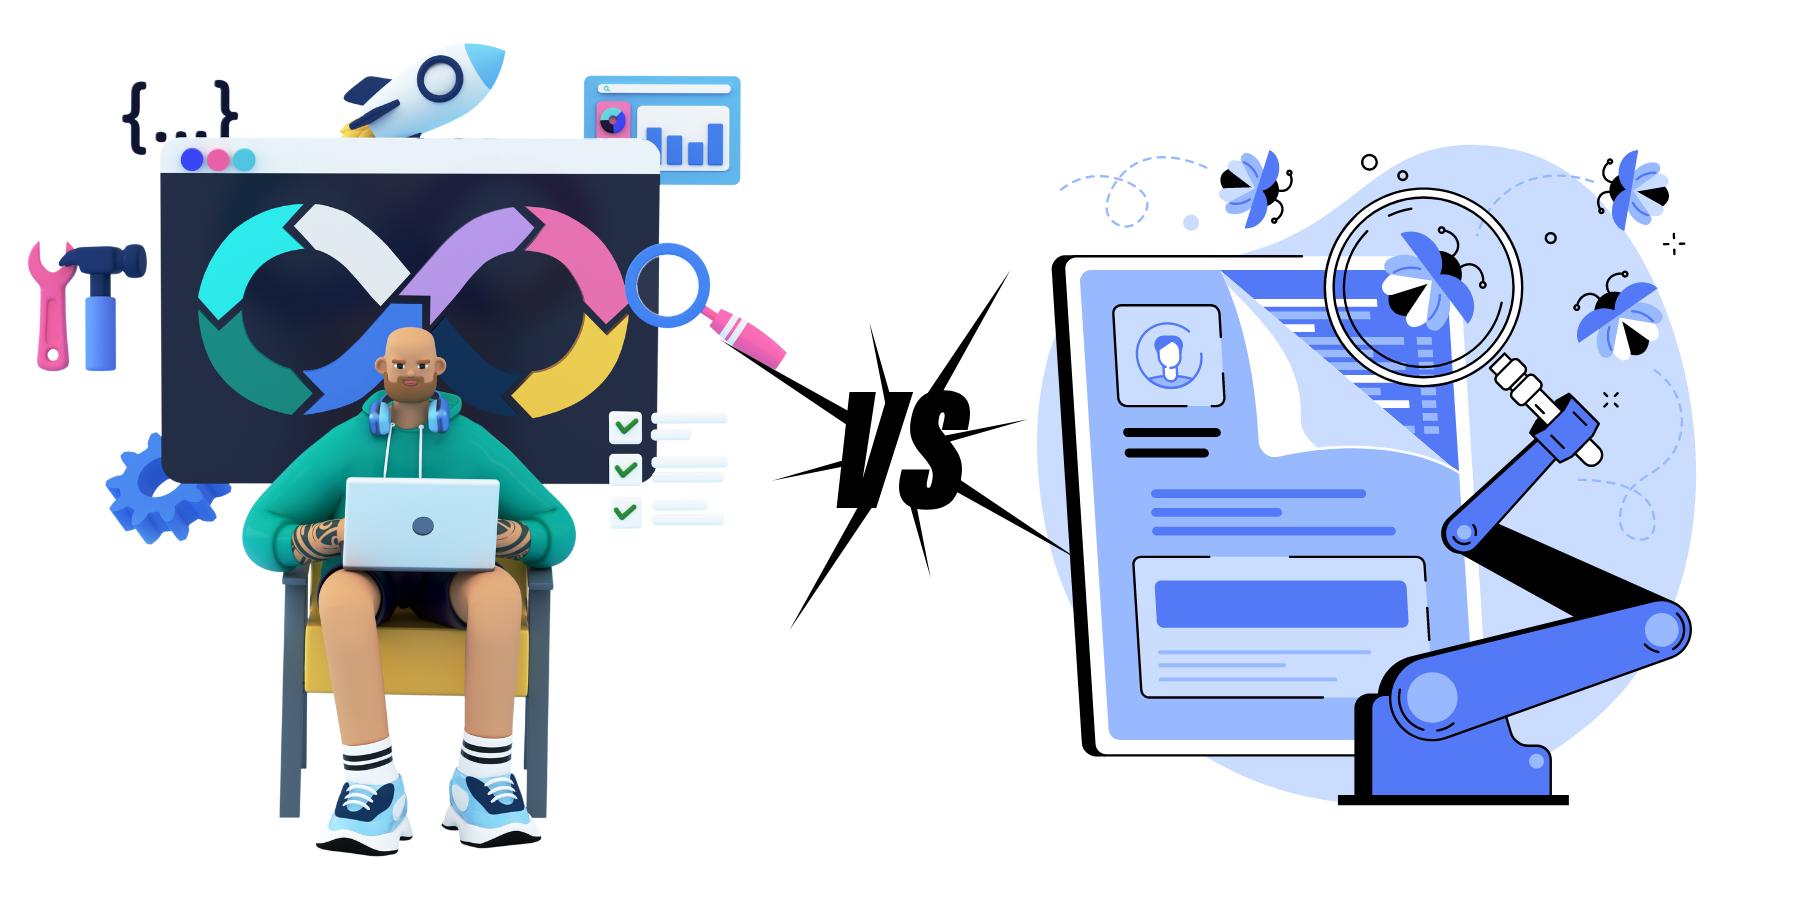 Manual vs Automated software testing